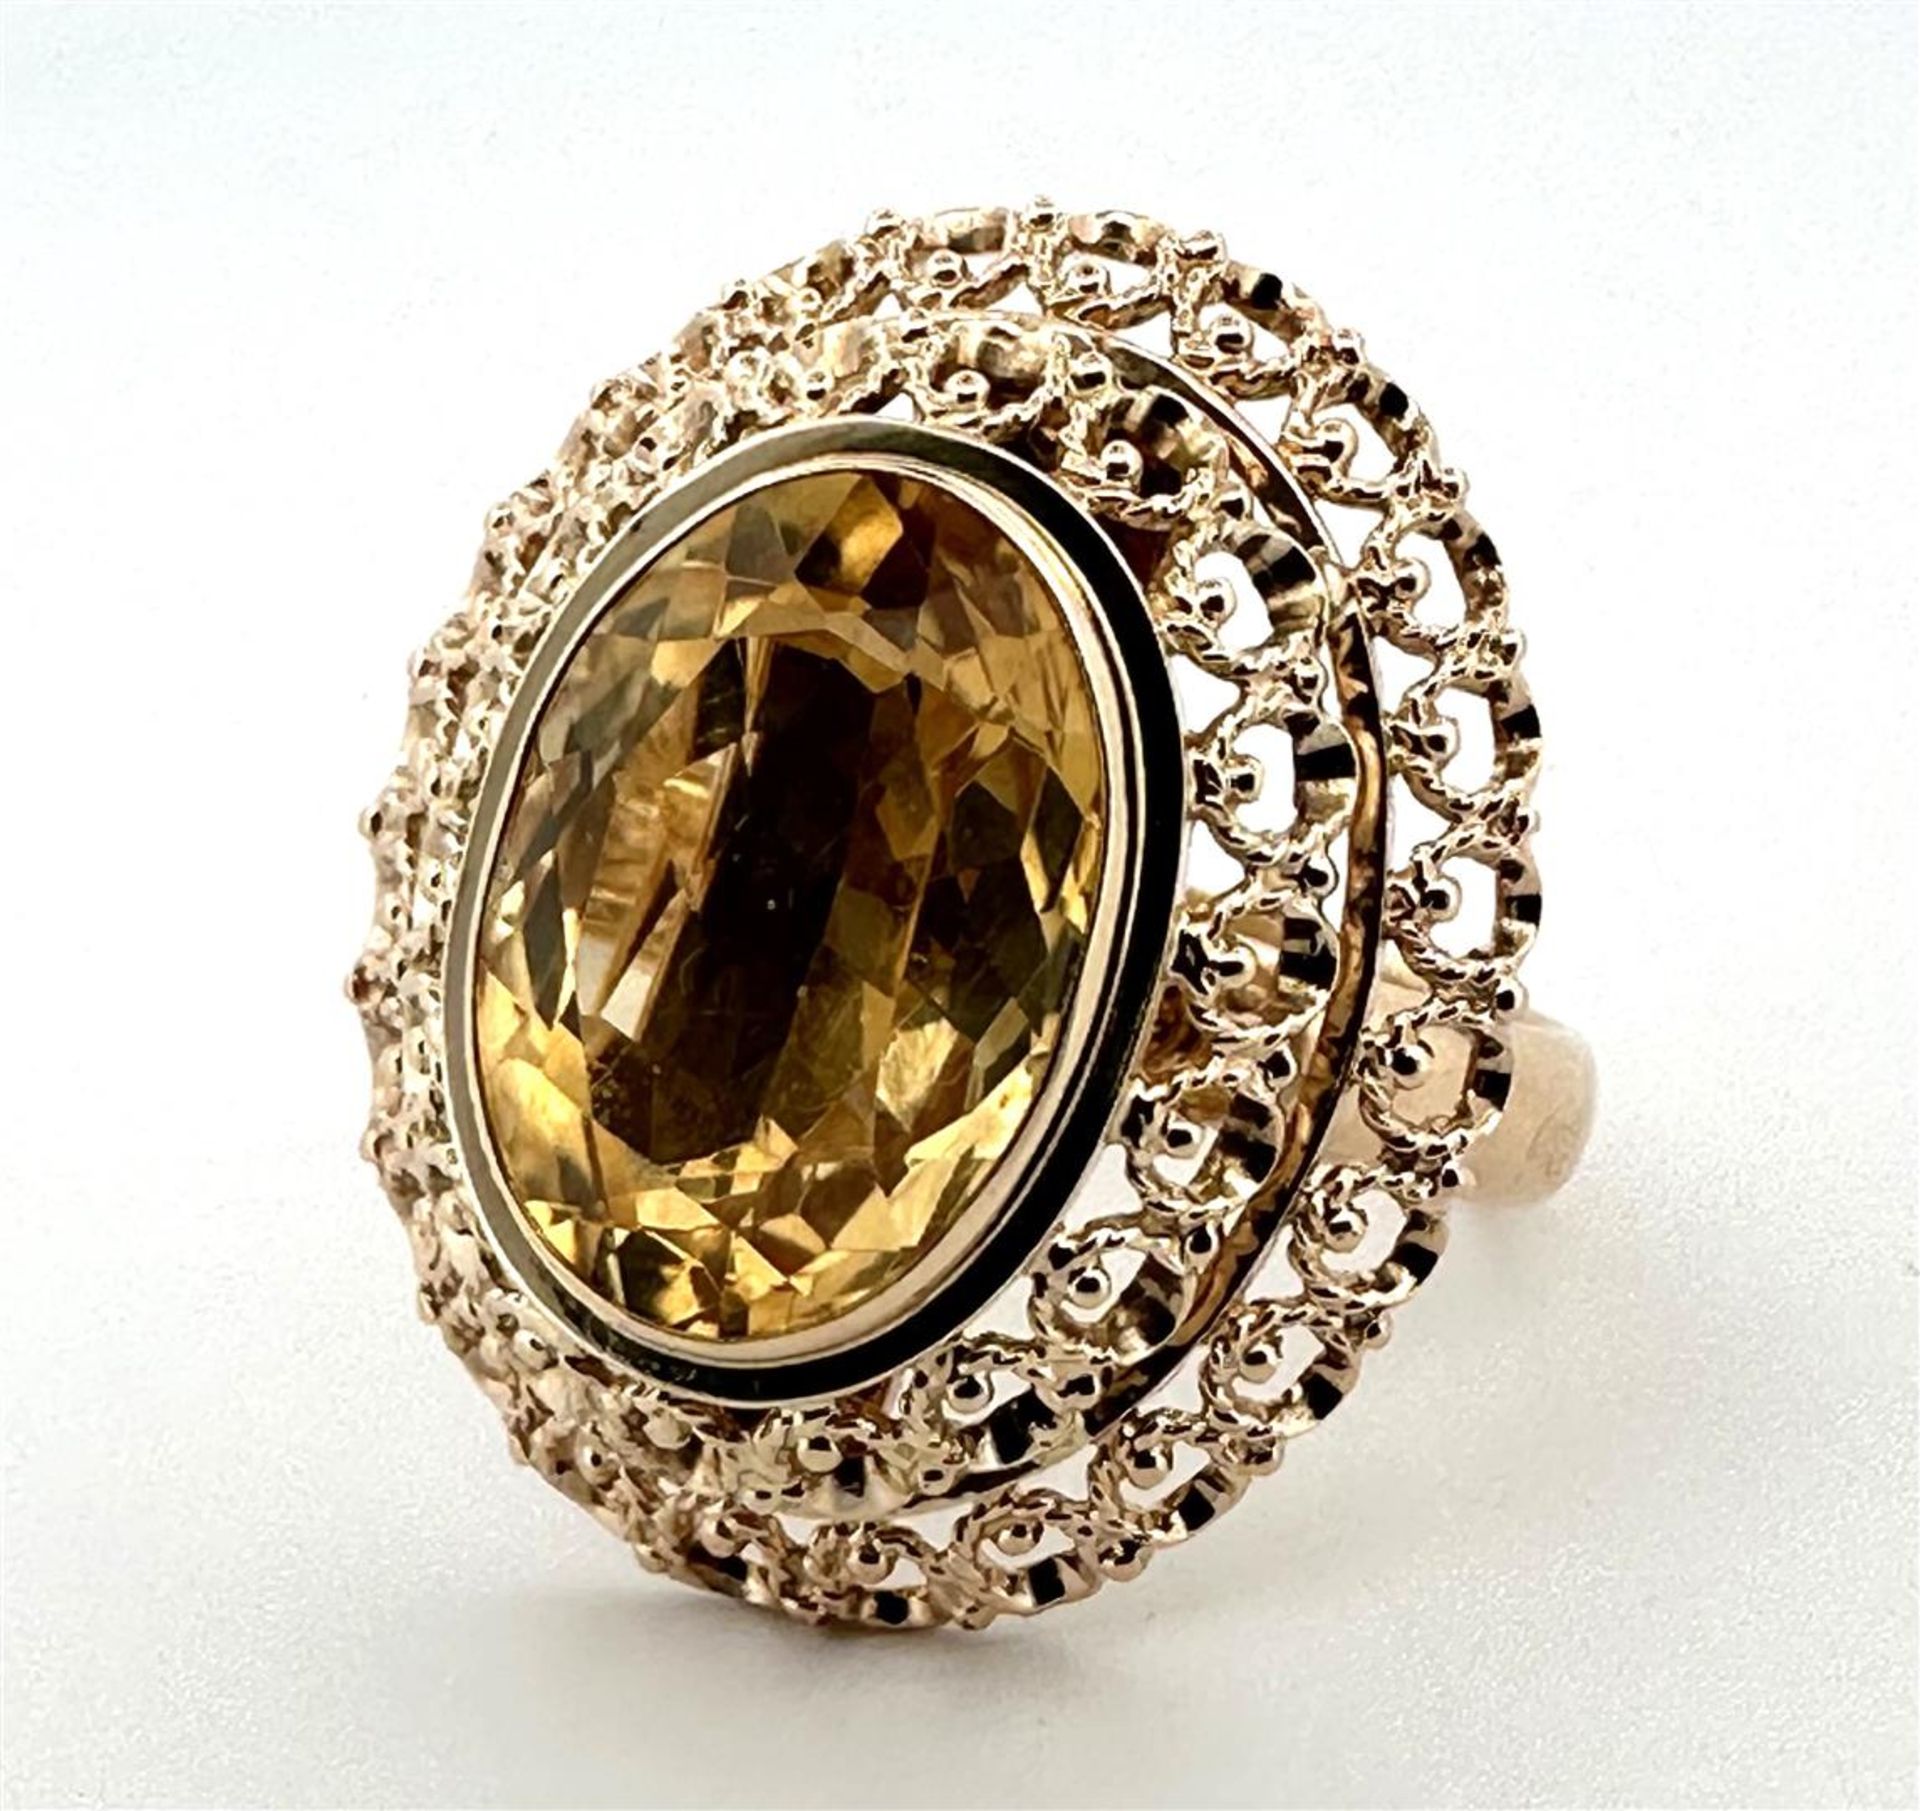 14kt yellow gold statement cocktail ring with citrine. 
The ring has a beautiful openwork double edg - Bild 2 aus 6